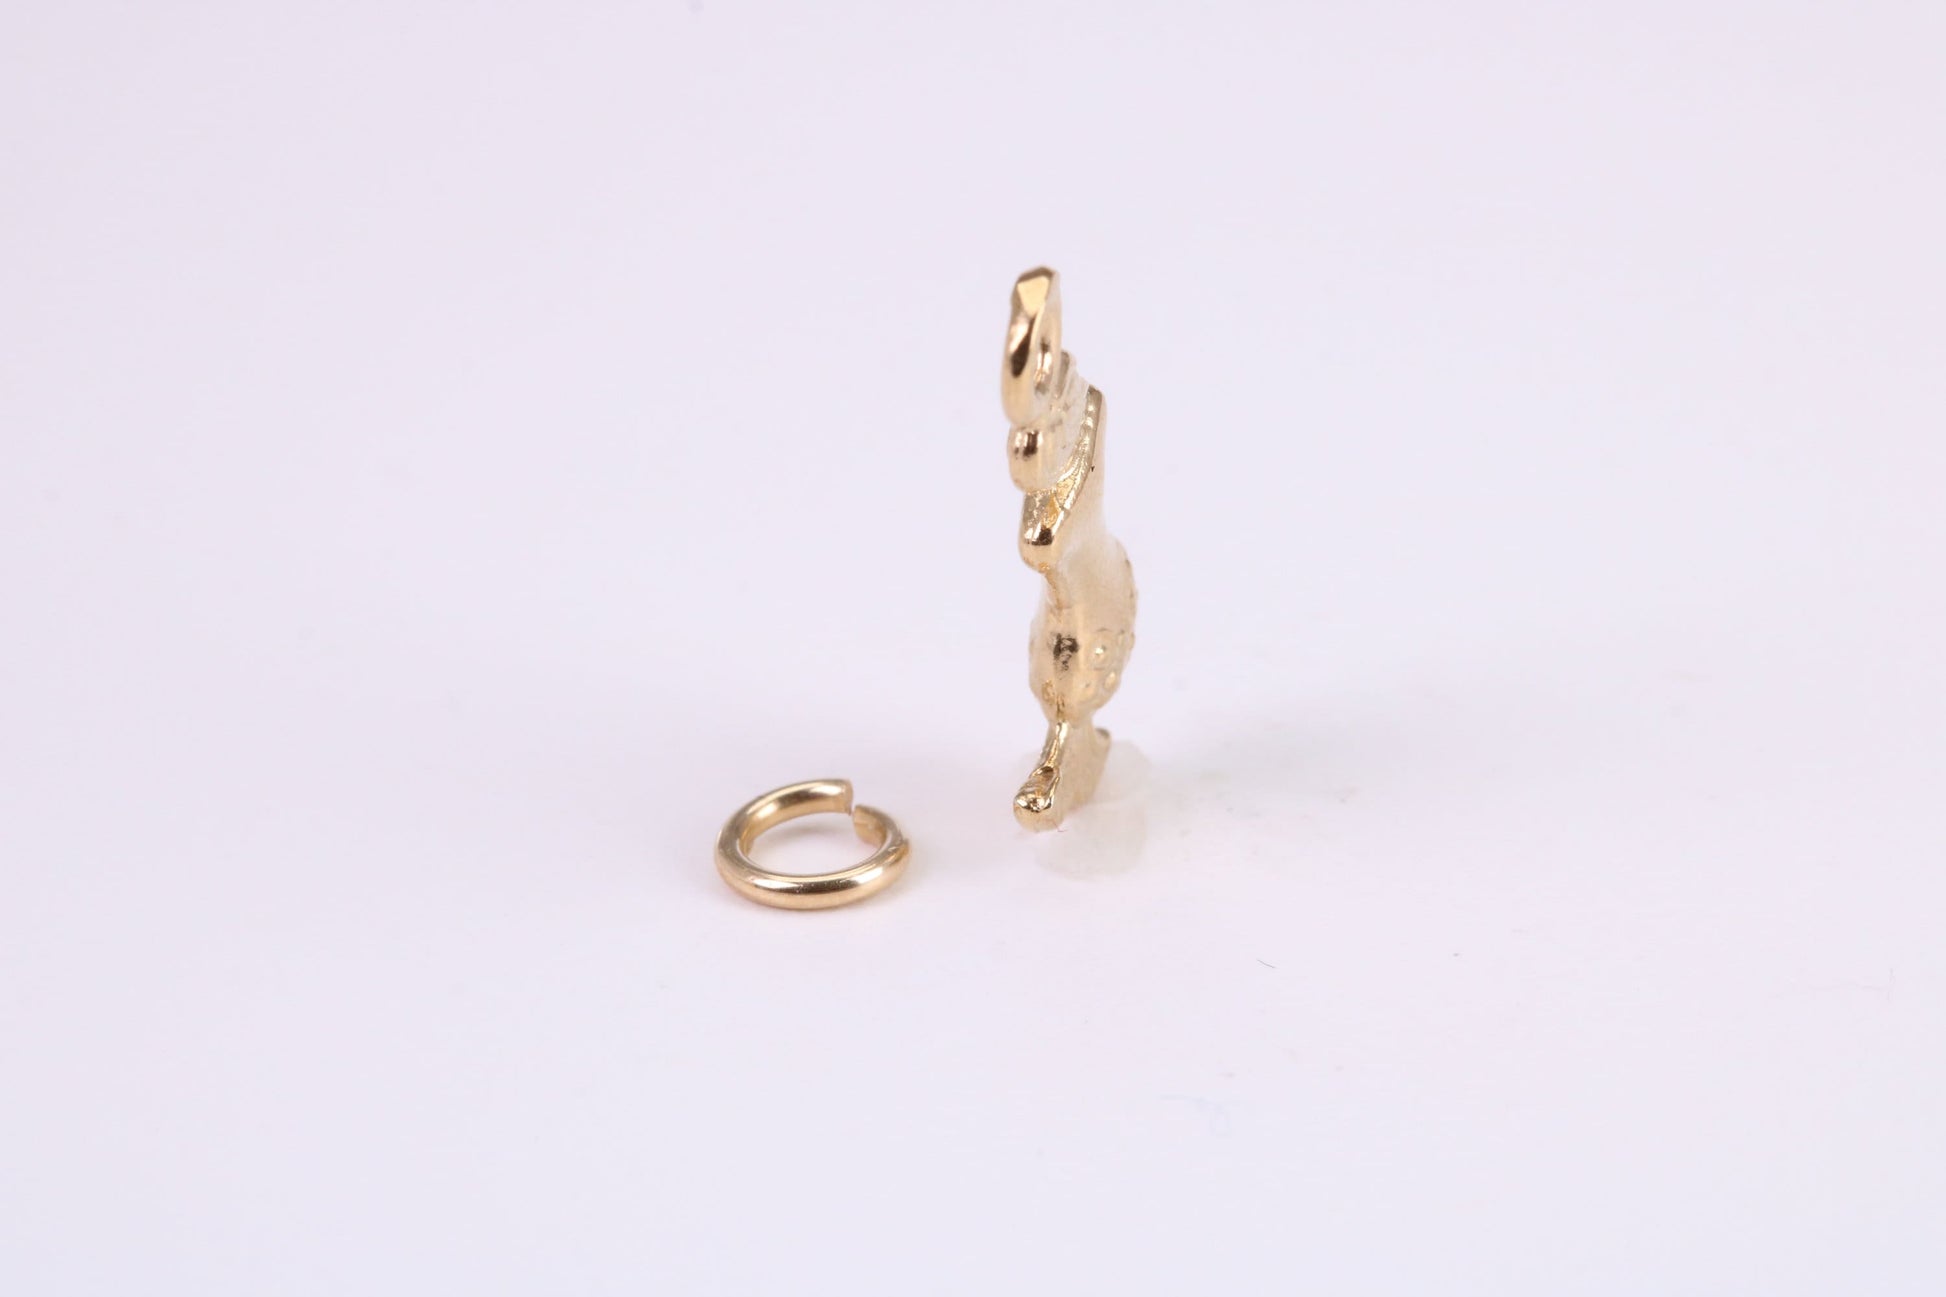 Mermaid Charm, Traditional Charm, Made from Solid Yellow Gold, British Hallmarked, Complete with Attachment Link